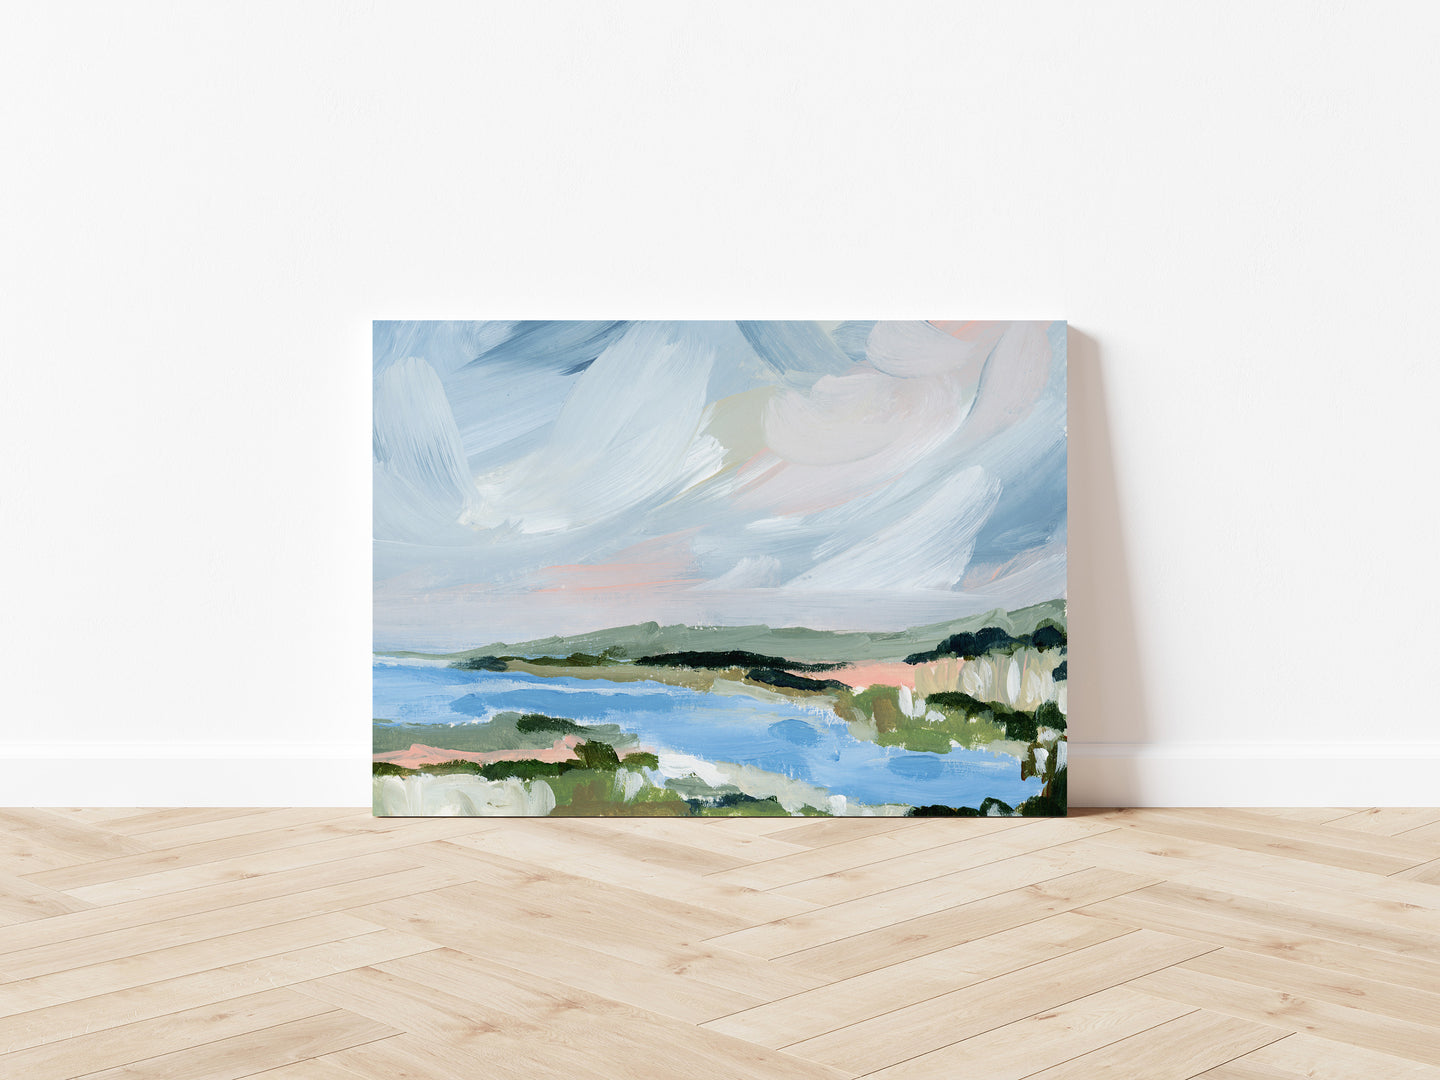 Oyster River, Chatham on Canvas Wrap